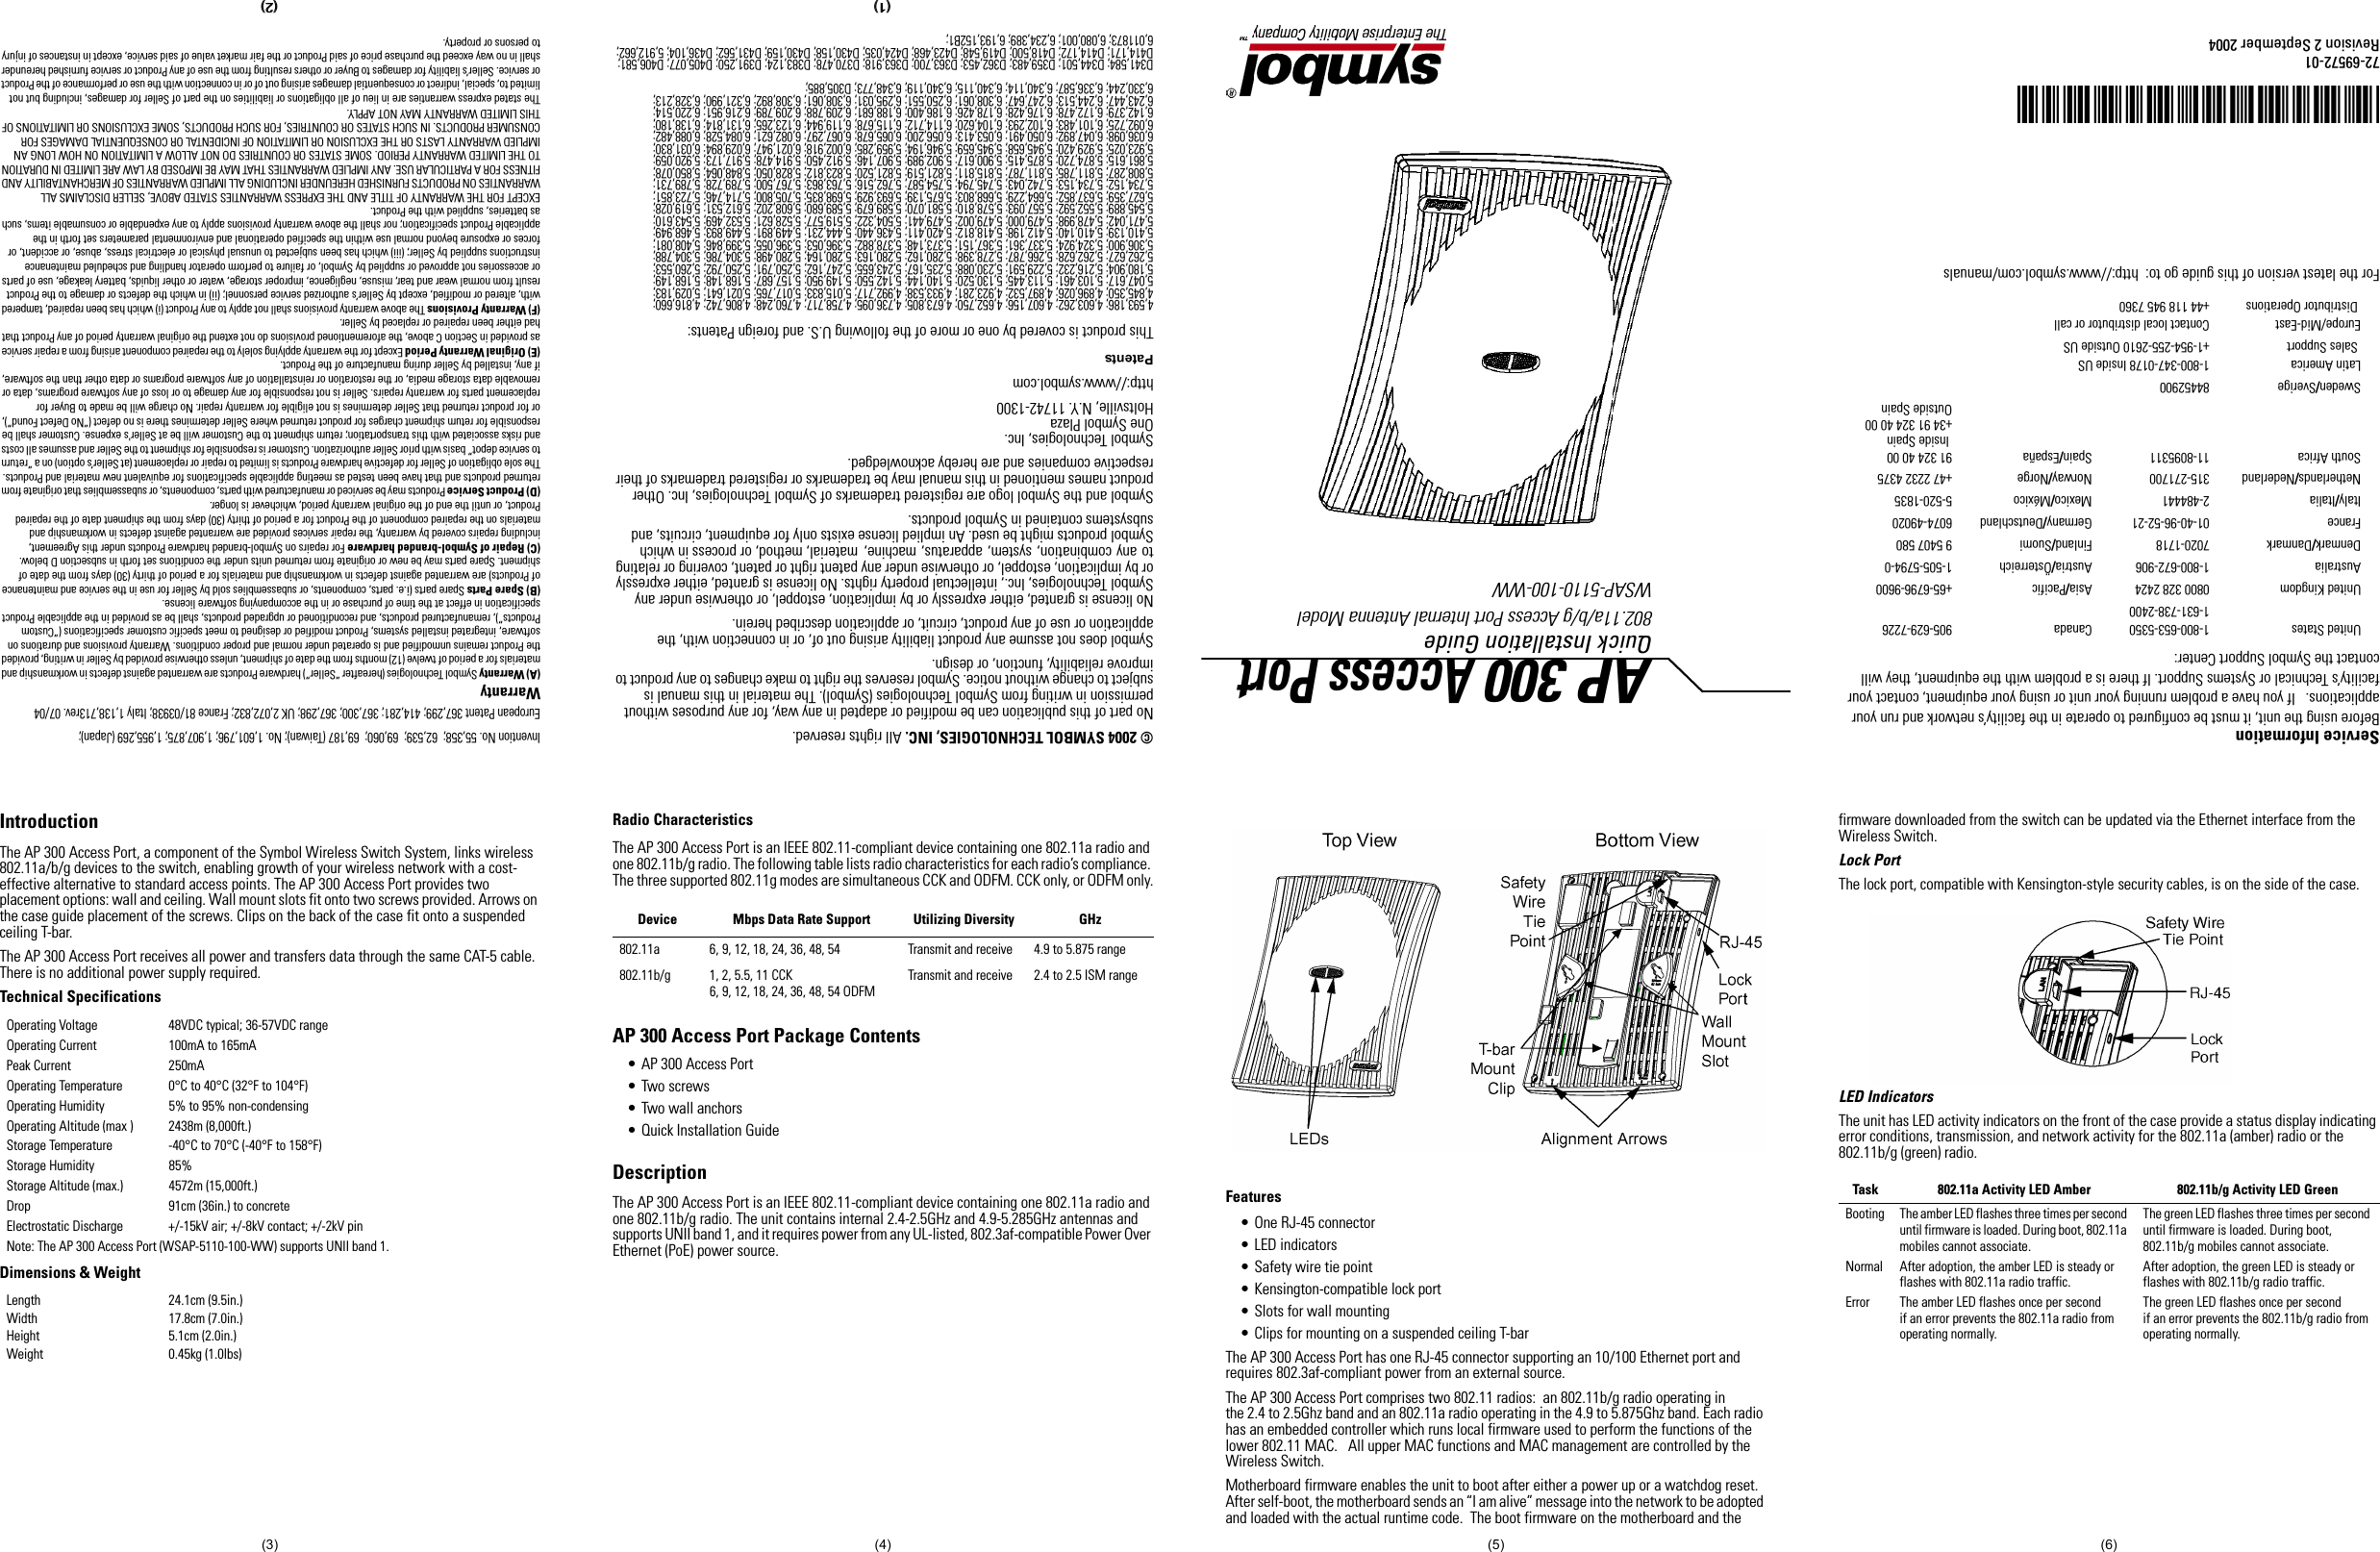 © 2004 SYMBOL TECHNOLOGIES, INC. All rights reserved.No part of this publication can be modified or adapted in any way, for any purposes without permission in writing from Symbol Technologies (Symbol). The material in this manual is subject to change without notice. Symbol reserves the right to make changes to any product to improve reliability, function, or design.Symbol does not assume any product liability arising out of, or in connection with, the application or use of any product, circuit, or application described herein.No license is granted, either expressly or by implication, estoppel, or otherwise under any Symbol Technologies, Inc., intellectual property rights. No license is granted, either expressly or by implication, estoppel, or otherwise under any patent right or patent, covering or relating to any combination, system, apparatus, machine, material, method, or process in which Symbol products might be used. An implied license exists only for equipment, circuits, and subsystems contained in Symbol products.Symbol and the Symbol logo are registered trademarks of Symbol Technologies, Inc. Other product names mentioned in this manual may be trademarks or registered trademarks of their respective companies and are hereby acknowledged.Symbol Technologies, Inc.One Symbol PlazaHoltsville, N.Y. 11742-1300http://www.symbol.comPatentsThis product is covered by one or more of the following U.S. and foreign Patents:4,593,186; 4,603,262; 4,607,156; 4,652,750; 4,673,805; 4,736,095; 4,758,717; 4,760,248; 4,806,742; 4,816,660; 4,845,350; 4,896,026; 4,897,532; 4,923,281; 4,933,538; 4,992,717; 5,015,833; 5,017,765; 5,021,641; 5,029,183; 5,047,617; 5,103,461; 5,113,445; 5,130,520; 5,140,144; 5,142,550; 5,149,950; 5,157,687; 5,168,148; 5,168,149; 5,180,904; 5,216,232; 5,229,591; 5,230,088; 5,235,167; 5,243,655; 5,247,162; 5,250,791; 5,250,792; 5,260,553; 5,262,627; 5,262,628; 5,266,787; 5,278,398; 5,280,162; 5,280,163; 5,280,164; 5,280,498; 5,304,786; 5,304,788; 5,306,900; 5,324,924; 5,337,361; 5,367,151; 5,373,148; 5,378,882; 5,396,053; 5,396,055; 5,399,846; 5,408,081; 5,410,139; 5,410,140; 5,412,198; 5,418,812; 5,420,411; 5,436,440; 5,444,231; 5,449,891; 5,449,893; 5,468,949; 5,471,042; 5,478,998; 5,479,000; 5,479,002; 5,479,441; 5,504,322; 5,519,577; 5,528,621; 5,532,469; 5,543,610; 5,545,889; 5,552,592; 5,557,093; 5,578,810; 5,581,070; 5,589,679; 5,589,680; 5,608,202; 5,612,531; 5,619,028; 5,627,359; 5,637,852; 5,664,229; 5,668,803; 5,675,139; 5,693,929; 5,698,835; 5,705,800; 5,714,746; 5,723,851; 5,734,152; 5,734,153; 5,742,043; 5,745,794; 5,754,587; 5,762,516; 5,763,863; 5,767,500; 5,789,728; 5,789,731; 5,808,287; 5,811,785; 5,811,787; 5,815,811; 5,821,519; 5,821,520; 5,823,812; 5,828,050; 5,848,064; 5,850,078; 5,861,615; 5,874,720; 5,875,415; 5,900,617; 5,902,989; 5,907,146; 5,912,450; 5,914,478; 5,917,173; 5,920,059; 5,923,025; 5,929,420; 5,945,658; 5,945,659; 5,946,194; 5,959,285; 6,002,918; 6,021,947; 6,029,894: 6,031,830; 6,036,098; 6,047,892; 6,050,491; 6,053,413; 6,056,200; 6,065,678; 6,067,297; 6,082,621; 6,084,528; 6,088,482; 6,092,725; 6,101,483; 6,102,293; 6,104,620; 6,114,712; 6,115,678; 6,119,944; 6,123,265; 6,131,814; 6,138,180; 6,142,379; 6,172,478; 6,176,428; 6,178,426; 6,186,400; 6,188,681; 6,209,788; 6,209,789; 6,216,951; 6,220,514; 6,243,447; 6,244,513; 6,247,647; 6,308,061; 6,250,551; 6,295,031; 6,308,061; 6,308,892; 6,321,990; 6,328,213; 6,330,244; 6,336,587; 6,340,114; 6,340,115; 6,340,119; 6,348,773; D305,885; D341,584; D344,501; D359,483; D362,453; D363,700; D363,918; D370,478; D383,124; D391,250; D405,077; D406,581; D414,171; D414,172; D418,500; D419,548; D423,468; D424,035; D430,158; D430,159; D431,562; D436,104; 5,912,662; 6,011873; 6,080,001; 6,234,389; 6,193,152B1;Invention No. 55,358;  62,539;  69,060;  69,187 (Taiwan); No. 1,601,796; 1,907,875; 1,955,269 (Japan); European Patent 367,299; 414,281; 367,300; 367,298; UK 2,072,832; France 81/03938; Italy 1,138,713rev. 07/04Warranty(A) Warranty Symbol Technologies (hereafter “Seller”) hardware Products are warranted against defects in workmanship and materials for a period of twelve (12) months from the date of shipment, unless otherwise provided by Seller in writing, provided the Product remains unmodified and is operated under normal and proper conditions. Warranty provisions and durations on software, integrated installed systems, Product modified or designed to meet specific customer specifications (“Custom Products”), remanufactured products, and reconditioned or upgraded products, shall be as provided in the applicable Product specification in effect at the time of purchase or in the accompanying software license. (B) Spare Parts Spare parts (i.e. parts, components, or subassemblies sold by Seller for use in the service and maintenance of Products) are warranted against defects in workmanship and materials for a period of thirty (30) days from the date of shipment. Spare parts may be new or originate from returned units under the conditions set forth in subsection D below. (C) Repair of Symbol-branded hardware For repairs on Symbol-branded hardware Products under this Agreement, including repairs covered by warranty, the repair services provided are warranted against defects in workmanship and materials on the repaired component of the Product for a period of thirty (30) days from the shipment date of the repaired Product, or until the end of the original warranty period, whichever is longer. (D) Product Service Products may be serviced or manufactured with parts, components, or subassemblies that originate from returned products and that have been tested as meeting applicable specifications for equivalent new material and Products. The sole obligation of Seller for defective hardware Products is limited to repair or replacement (at Seller’s option) on a “return to service depot” basis with prior Seller authorization. Customer is responsible for shipment to the Seller and assumes all costs and risks associated with this transportation; return shipment to the Customer will be at Seller&apos;s expense. Customer shall be responsible for return shipment charges for product returned where Seller determines there is no defect (“No Defect Found”), or for product returned that Seller determines is not eligible for warranty repair. No charge will be made to Buyer for replacement parts for warranty repairs. Seller is not responsible for any damage to or loss of any software programs, data or removable data storage media, or the restoration or reinstallation of any software programs or data other than the software, if any, installed by Seller during manufacture of the Product. (E) Original Warranty Period Except for the warranty applying solely to the repaired component arising from a repair service as provided in Section C above, the aforementioned provisions do not extend the original warranty period of any Product that had either been repaired or replaced by Seller. (F) Warranty Provisions The above warranty provisions shall not apply to any Product (i) which has been repaired, tampered with, altered or modified, except by Seller’s authorized service personnel; (ii) in which the defects or damage to the Product result from normal wear and tear, misuse, negligence, improper storage, water or other liquids, battery leakage, use of parts or accessories not approved or supplied by Symbol, or failure to perform operator handling and scheduled maintenance instructions supplied by Seller; (iii) which has been subjected to unusual physical or electrical stress, abuse, or accident, or forces or exposure beyond normal use within the specified operational and environmental parameters set forth in the applicable Product specification; nor shall the above warranty provisions apply to any expendable or consumable items, such as batteries, supplied with the Product. EXCEPT FOR THE WARRANTY OF TITLE AND THE EXPRESS WARRANTIES STATED ABOVE, SELLER DISCLAIMS ALL WARRANTIES ON PRODUCTS FURNISHED HEREUNDER INCLUDING ALL IMPLIED WARRANTIES OF MERCHANTABILITY AND FITNESS FOR A PARTICULAR USE. ANY IMPLIED WARRANTIES THAT MAY BE IMPOSED BY LAW ARE LIMITED IN DURATION TO THE LIMITED WARRANTY PERIOD. SOME STATES OR COUNTRIES DO NOT ALLOW A LIMITATION ON HOW LONG AN IMPLIED WARRANTY LASTS OR THE EXCLUSION OR LIMITATION OF INCIDENTAL OR CONSEQUENTIAL DAMAGES FOR CONSUMER PRODUCTS. IN SUCH STATES OR COUNTRIES, FOR SUCH PRODUCTS, SOME EXCLUSIONS OR LIMITATIONS OF THIS LIMITED WARRANTY MAY NOT APPLY. The stated express warranties are in lieu of all obligations or liabilities on the part of Seller for damages, including but not limited to, special, indirect or consequential damages arising out of or in connection with the use or performance of the Product or service. Seller’s liability for damages to Buyer or others resulting from the use of any Product or service furnished hereunder shall in no way exceed the purchase price of said Product or the fair market value of said service, except in instances of injury to persons or property.Service InformationBefore using the unit, it must be configured to operate in the facility’s network and run your applications.   If you have a problem running your unit or using your equipment, contact your facility’s Technical or Systems Support. If there is a problem with the equipment, they will contact the Symbol Support Center:For the latest version of this guide go to:  http://www.symbol.com/manuals72-69572-01Revision 2 September 2004United States 1-800-653-53501-631-738-2400Canada 905-629-7226United Kingdom 0800 328 2424  Asia/Pacific +65-6796-9600 Australia 1-800-672-906 Austria/Österreich 1-505-5794-0Denmark/Danmark 7020-1718 Finland/Suomi 9 5407 580France 01-40-96-52-21 Germany/Deutschland 6074-49020Italy/Italia 2-484441 Mexico/México 5-520-1835Netherlands/Nederland 315-271700 Norway/Norge +47 2232 4375South Africa 11-8095311 Spain/España 91 324 40 00 Inside Spain+34 91 324 40 00Outside SpainSweden/Sverige 84452900Latin America Sales Support1-800-347-0178 Inside US+1-954-255-2610 Outside USEurope/Mid-East Distributor OperationsContact local distributor or call+44 118 945 7360AP 300 Access PortQuick Installation Guide802.11a/b/g Access Port Internal Antenna ModelWSAP-5110-100-WWIntroductionThe AP 300 Access Port, a component of the Symbol Wireless Switch System, links wireless 802.11a/b/g devices to the switch, enabling growth of your wireless network with a cost-effective alternative to standard access points. The AP 300 Access Port provides two placement options: wall and ceiling. Wall mount slots fit onto two screws provided. Arrows on the case guide placement of the screws. Clips on the back of the case fit onto a suspended ceiling T-bar.The AP 300 Access Port receives all power and transfers data through the same CAT-5 cable. There is no additional power supply required.Technical SpecificationsDimensions &amp; WeightRadio CharacteristicsThe AP 300 Access Port is an IEEE 802.11-compliant device containing one 802.11a radio and one 802.11b/g radio. The following table lists radio characteristics for each radio’s compliance. The three supported 802.11g modes are simultaneous CCK and ODFM. CCK only, or ODFM only.AP 300 Access Port Package Contents• AP 300 Access Port• Two screws• Two wall anchors• Quick Installation GuideDescriptionThe AP 300 Access Port is an IEEE 802.11-compliant device containing one 802.11a radio and one 802.11b/g radio. The unit contains internal 2.4-2.5GHz and 4.9-5.285GHz antennas and supports UNII band 1, and it requires power from any UL-listed, 802.3af-compatible Power Over Ethernet (PoE) power source.Features• One RJ-45 connector• LED indicators• Safety wire tie point• Kensington-compatible lock port• Slots for wall mounting• Clips for mounting on a suspended ceiling T-barThe AP 300 Access Port has one RJ-45 connector supporting an 10/100 Ethernet port and requires 802.3af-compliant power from an external source.The AP 300 Access Port comprises two 802.11 radios:  an 802.11b/g radio operating in the 2.4 to 2.5Ghz band and an 802.11a radio operating in the 4.9 to 5.875Ghz band. Each radio has an embedded controller which runs local firmware used to perform the functions of the lower 802.11 MAC.   All upper MAC functions and MAC management are controlled by the Wireless Switch.Motherboard firmware enables the unit to boot after either a power up or a watchdog reset. After self-boot, the motherboard sends an “I am alive” message into the network to be adopted and loaded with the actual runtime code.  The boot firmware on the motherboard and the firmware downloaded from the switch can be updated via the Ethernet interface from the Wireless Switch.Lock PortThe lock port, compatible with Kensington-style security cables, is on the side of the case.LED IndicatorsThe unit has LED activity indicators on the front of the case provide a status display indicating error conditions, transmission, and network activity for the 802.11a (amber) radio or the 802.11b/g (green) radio.Operating Voltage 48VDC typical; 36-57VDC rangeOperating Current 100mA to 165mAPeak Current 250mAOperating Temperature 0°C to 40°C (32°F to 104°F)Operating Humidity 5% to 95% non-condensingOperating Altitude (max ) 2438m (8,000ft.)Storage Temperature -40°C to 70°C (-40°F to 158°F)Storage Humidity 85%Storage Altitude (max.) 4572m (15,000ft.)Drop 91cm (36in.) to concreteElectrostatic Discharge +/-15kV air; +/-8kV contact; +/-2kV pinNote: The AP 300 Access Port (WSAP-5110-100-WW) supports UNII band 1.Length 24.1cm (9.5in.)Width 17.8cm (7.0in.)Height 5.1cm (2.0in.)Weight 0.45kg (1.0lbs)Device Mbps Data Rate Support Utilizing Diversity GHz802.11a 6, 9, 12, 18, 24, 36, 48, 54 Transmit and receive 4.9 to 5.875 range802.11b/g 1, 2, 5.5, 11 CCK6, 9, 12, 18, 24, 36, 48, 54 ODFMTransmit and receive 2.4 to 2.5 ISM rangeTask 802.11a Activity LED Amber 802.11b/g Activity LED GreenBooting The amber LED flashes three times per second until firmware is loaded. During boot, 802.11a mobiles cannot associate.The green LED flashes three times per second until firmware is loaded. During boot, 802.11b/g mobiles cannot associate.Normal After adoption, the amber LED is steady or flashes with 802.11a radio traffic.After adoption, the green LED is steady or flashes with 802.11b/g radio traffic.Error The amber LED flashes once per second if an error prevents the 802.11a radio from operating normally.The green LED flashes once per second if an error prevents the 802.11b/g radio from operating normally.(1) (2)(3) (4) (5) (6)(1) (2)